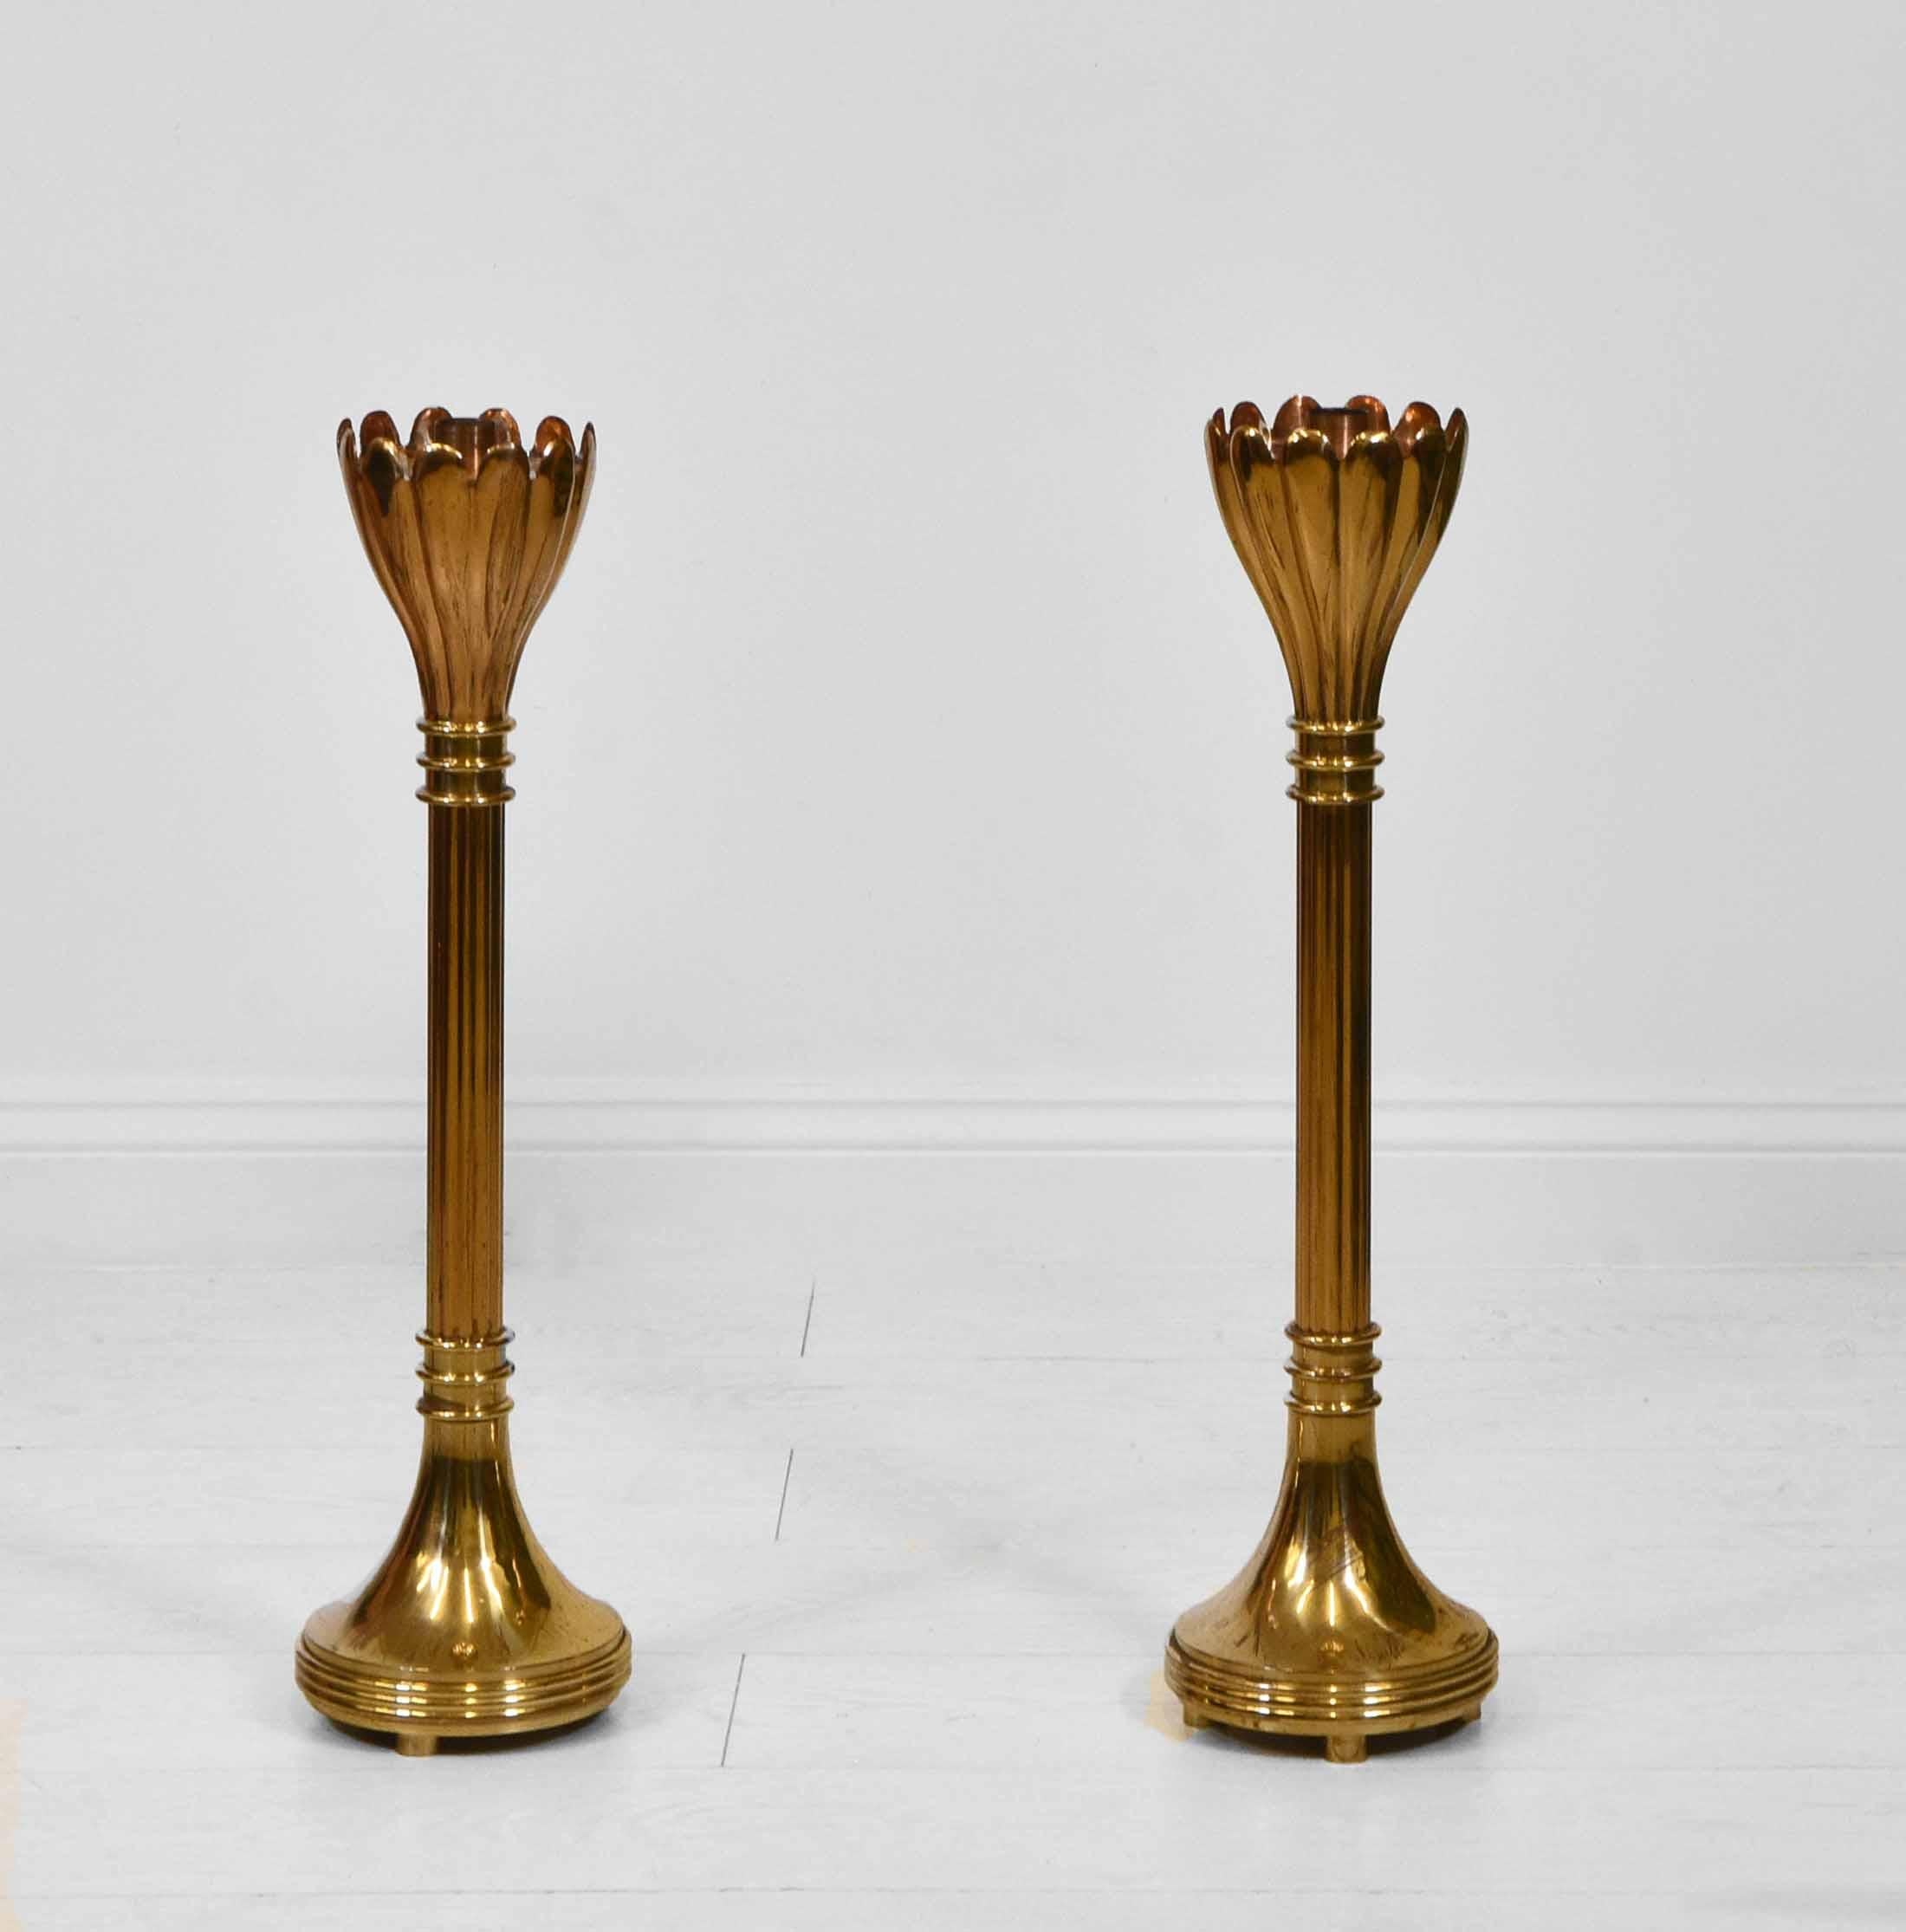 A pair of brass fluted floor standing candle stands with flared scalloped uppers. Circa early to mid 20th century.

The candle stands are made of brass, one having copper inset the other brass to the tops, They have weighted bases, each one weighing